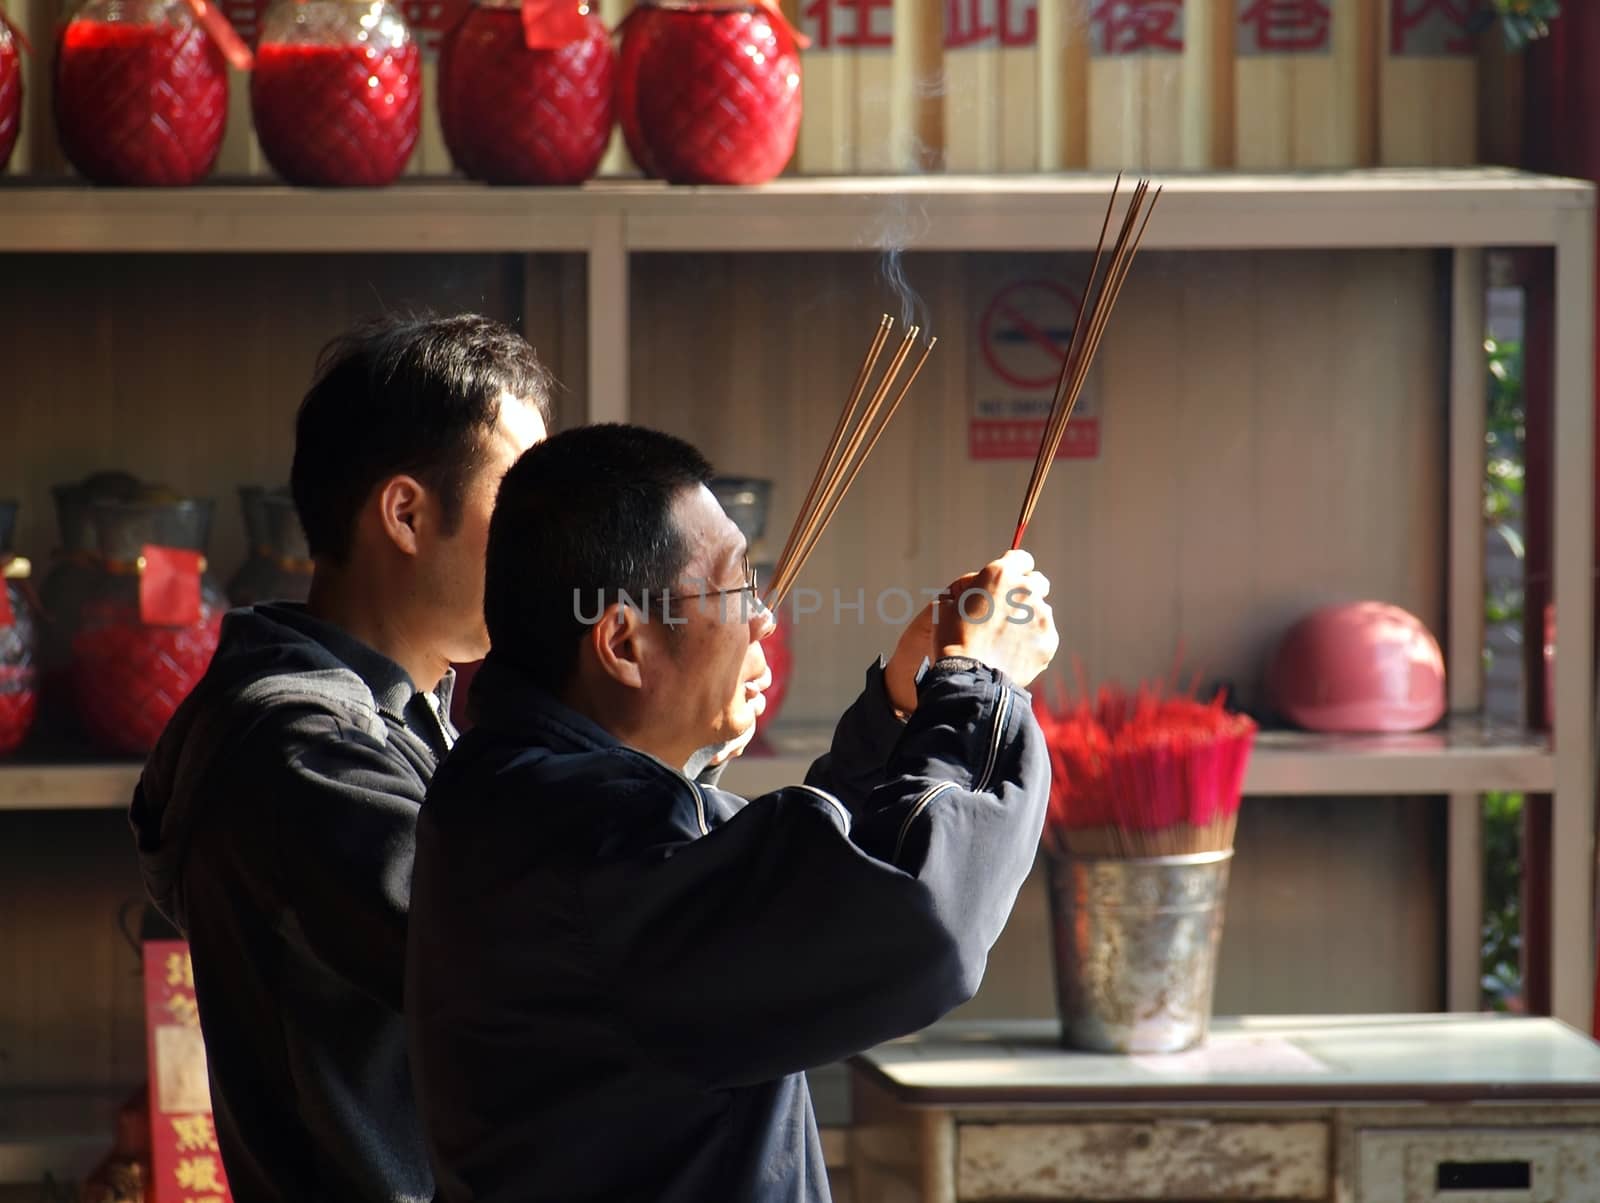 KAOHSIUNG, TAIWAN - FEBRUARY 10: Two unidentified men light incense sticks and say prayers for the Chinese New Year on February 10, 2013 in Kaohsiung.